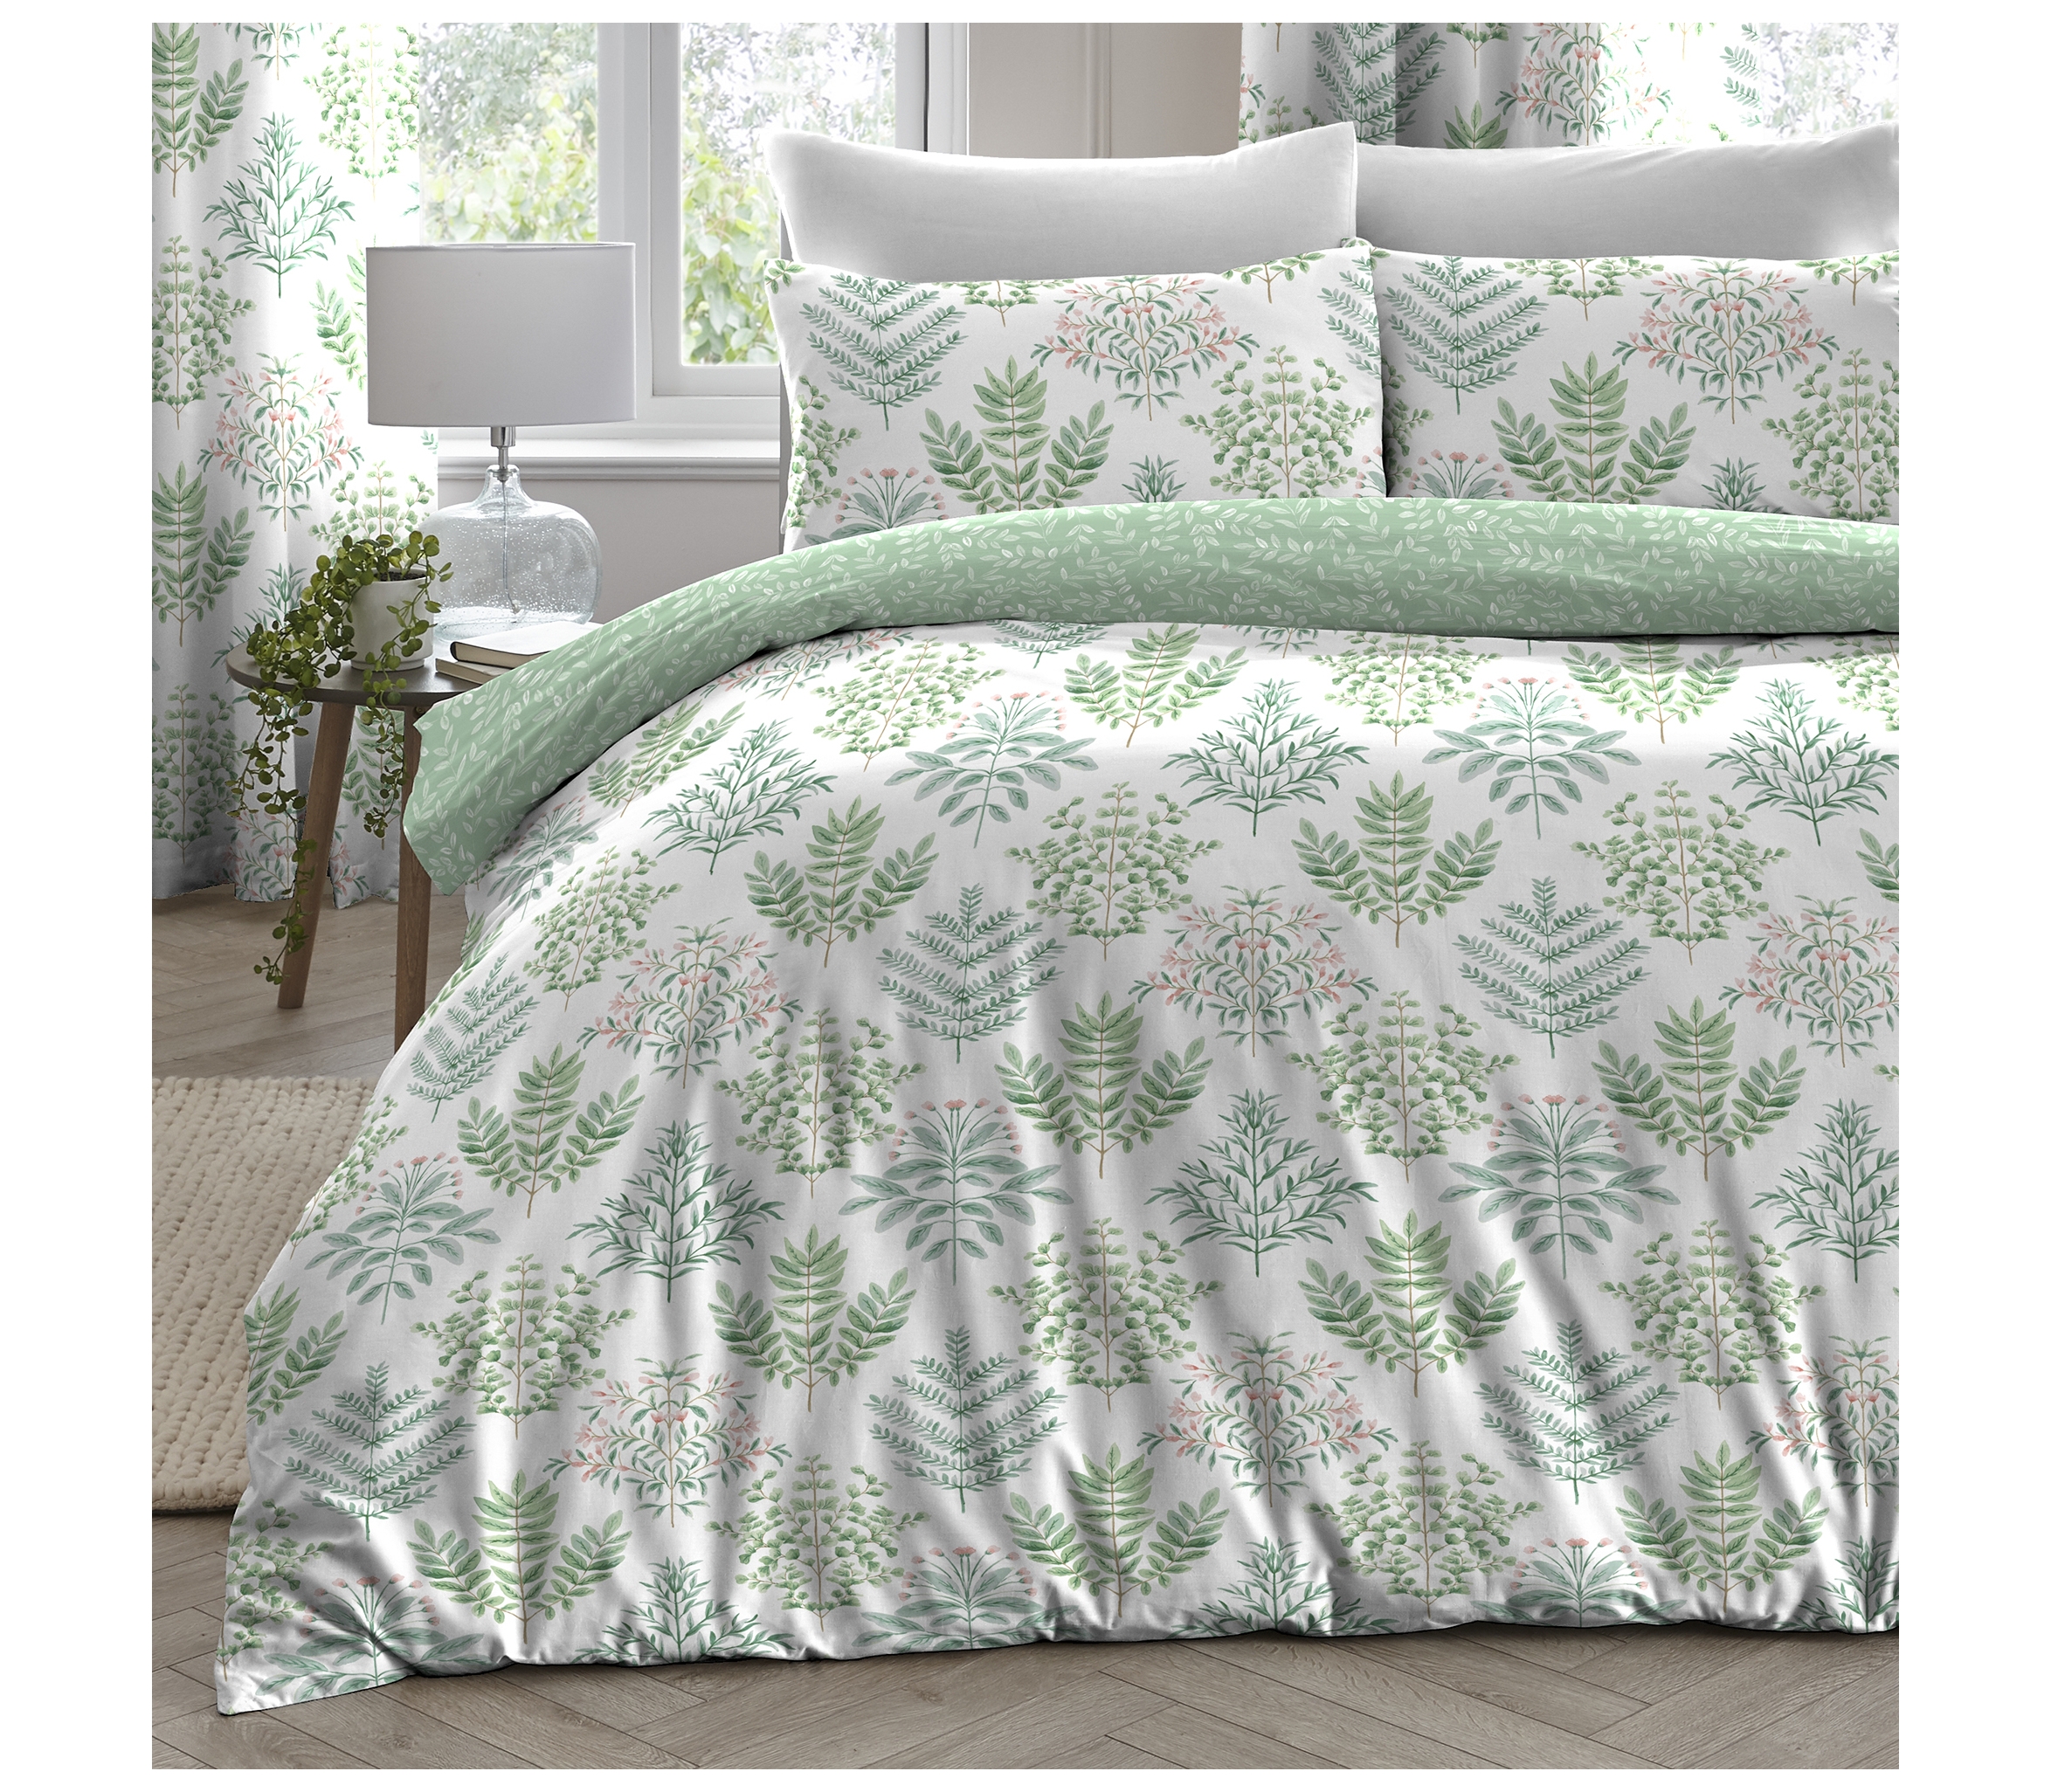 Dreams & Drapes EMILY Green Ferns Easy Care Bedding & Pencil Pleat Curtains 